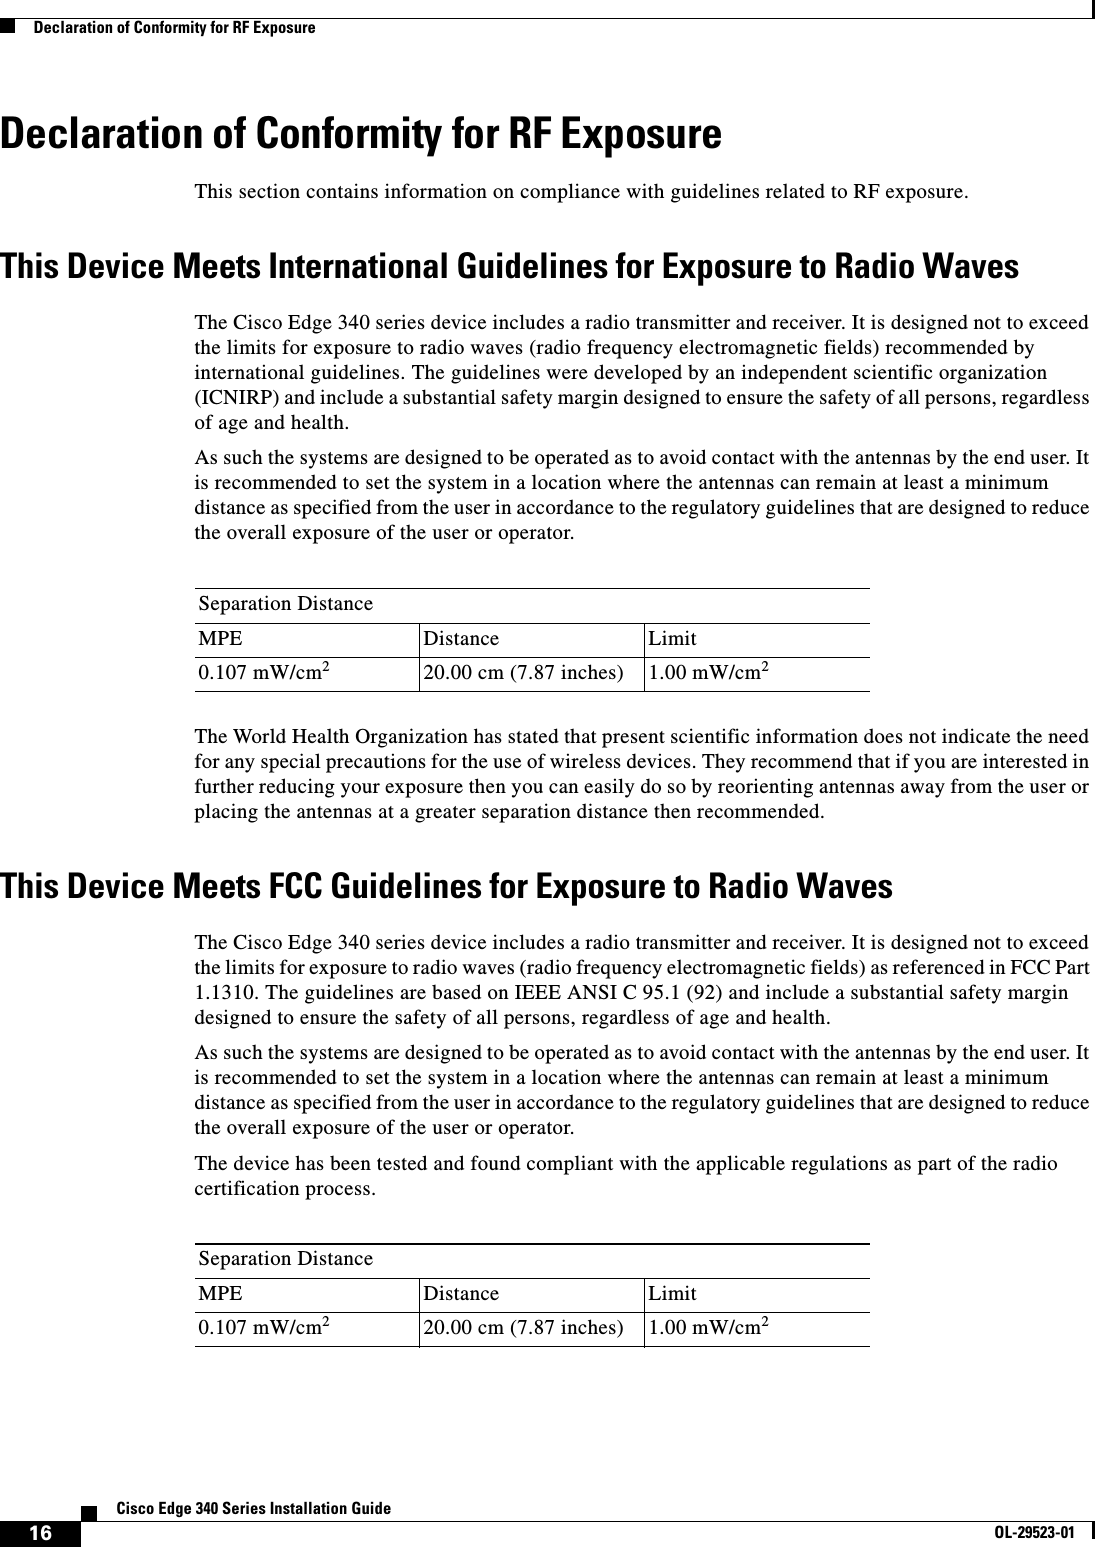  16Cisco Edge 340 Series Installation GuideOL-29523-01Declaration of Conformity for RF ExposureDeclaration of Conformity for RF ExposureThis section contains information on compliance with guidelines related to RF exposure.This Device Meets International Guidelines for Exposure to Radio WavesThe Cisco Edge 340 series device includes a radio transmitter and receiver. It is designed not to exceed the limits for exposure to radio waves (radio frequency electromagnetic fields) recommended by international guidelines. The guidelines were developed by an independent scientific organization (ICNIRP) and include a substantial safety margin designed to ensure the safety of all persons, regardless of age and health.As such the systems are designed to be operated as to avoid contact with the antennas by the end user. It is recommended to set the system in a location where the antennas can remain at least a minimum distance as specified from the user in accordance to the regulatory guidelines that are designed to reduce the overall exposure of the user or operator.The World Health Organization has stated that present scientific information does not indicate the need for any special precautions for the use of wireless devices. They recommend that if you are interested in further reducing your exposure then you can easily do so by reorienting antennas away from the user or placing the antennas at a greater separation distance then recommended.This Device Meets FCC Guidelines for Exposure to Radio Waves The Cisco Edge 340 series device includes a radio transmitter and receiver. It is designed not to exceed the limits for exposure to radio waves (radio frequency electromagnetic fields) as referenced in FCC Part 1.1310. The guidelines are based on IEEE ANSI C 95.1 (92) and include a substantial safety margin designed to ensure the safety of all persons, regardless of age and health.As such the systems are designed to be operated as to avoid contact with the antennas by the end user. It is recommended to set the system in a location where the antennas can remain at least a minimum distance as specified from the user in accordance to the regulatory guidelines that are designed to reduce the overall exposure of the user or operator.The device has been tested and found compliant with the applicable regulations as part of the radio certification process. Separation DistanceMPE Distance Limit0.107 mW/cm220.00 cm (7.87 inches)  1.00 mW/cm2Separation DistanceMPE Distance Limit0.107 mW/cm220.00 cm (7.87 inches)  1.00 mW/cm2